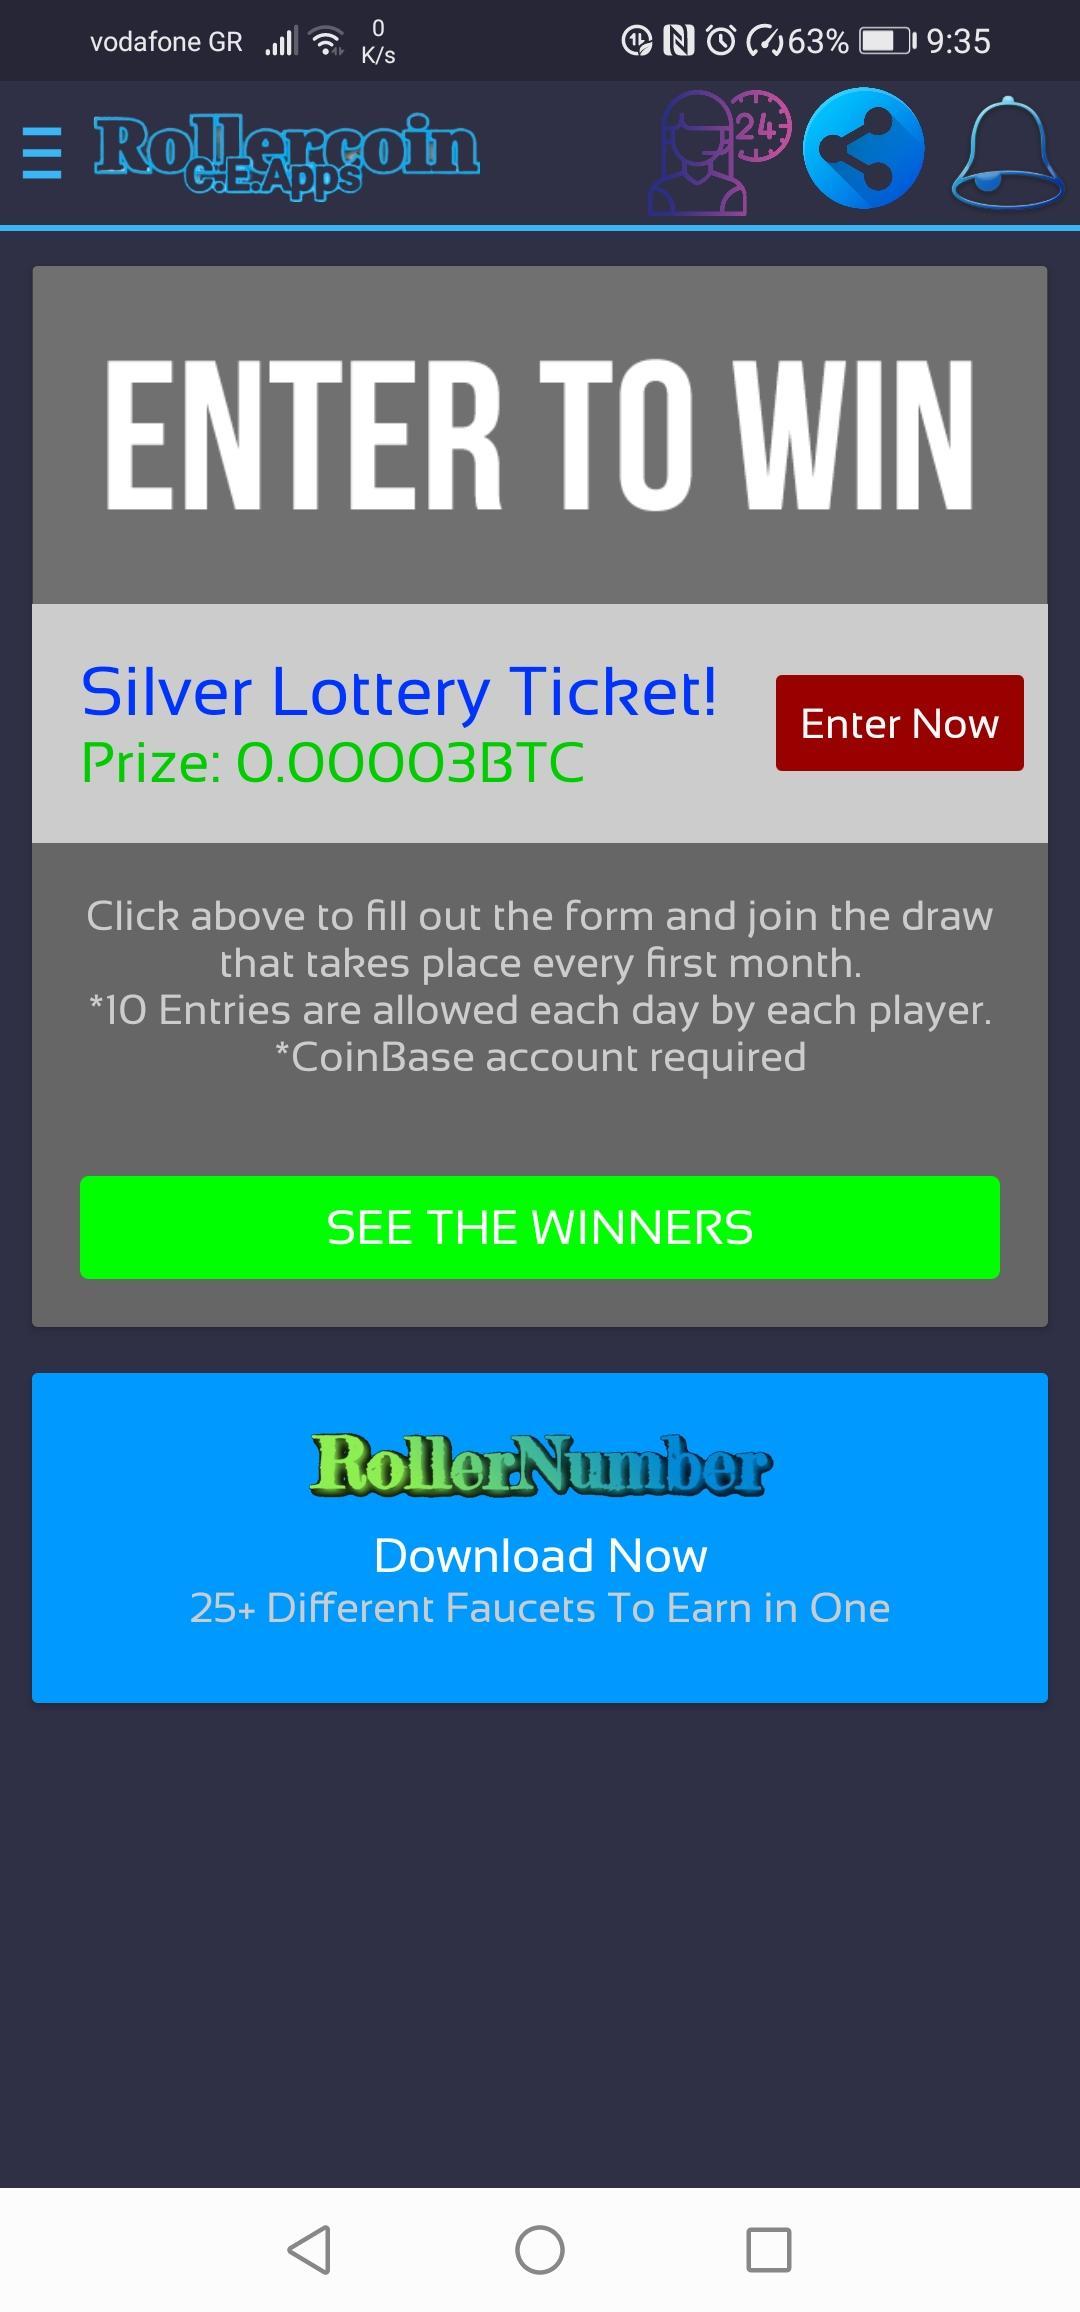 Rollercoin Earn Free Bitcoin Ehereum Dogecoin Pour Android Telechargez L Apk